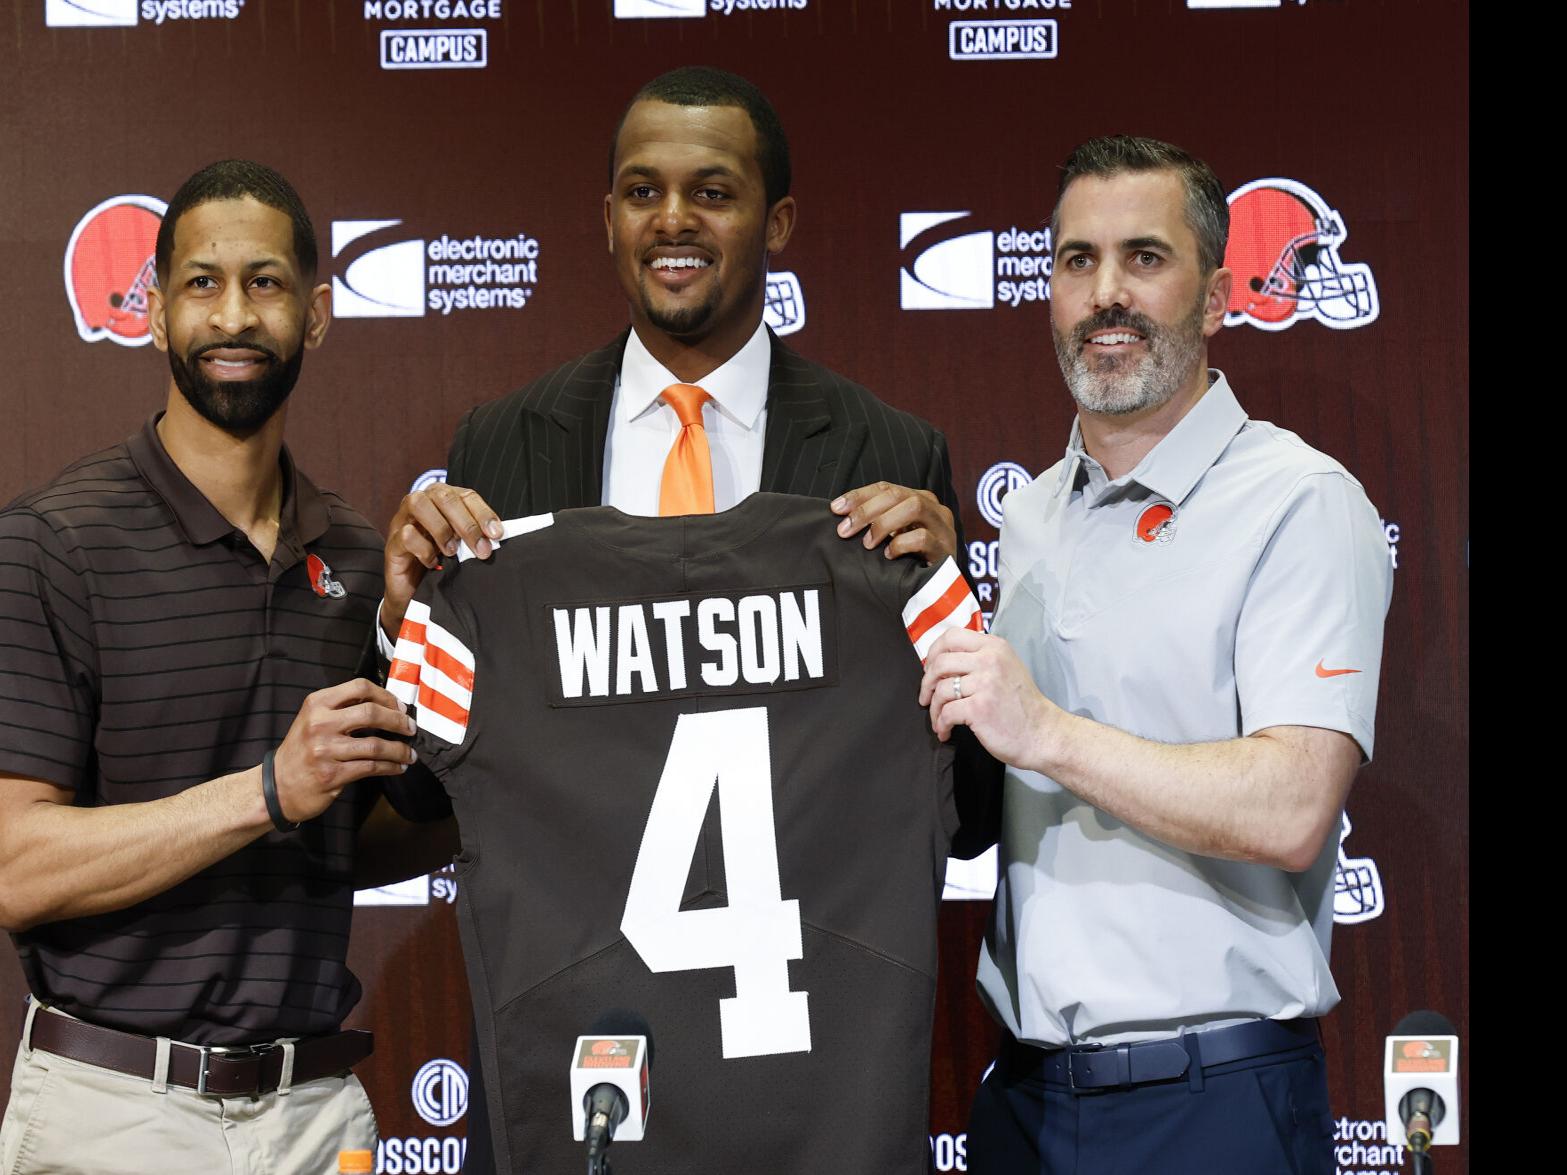 Wait for resolution of Deshaun Watson case before passing judgment, Andy  Baskin